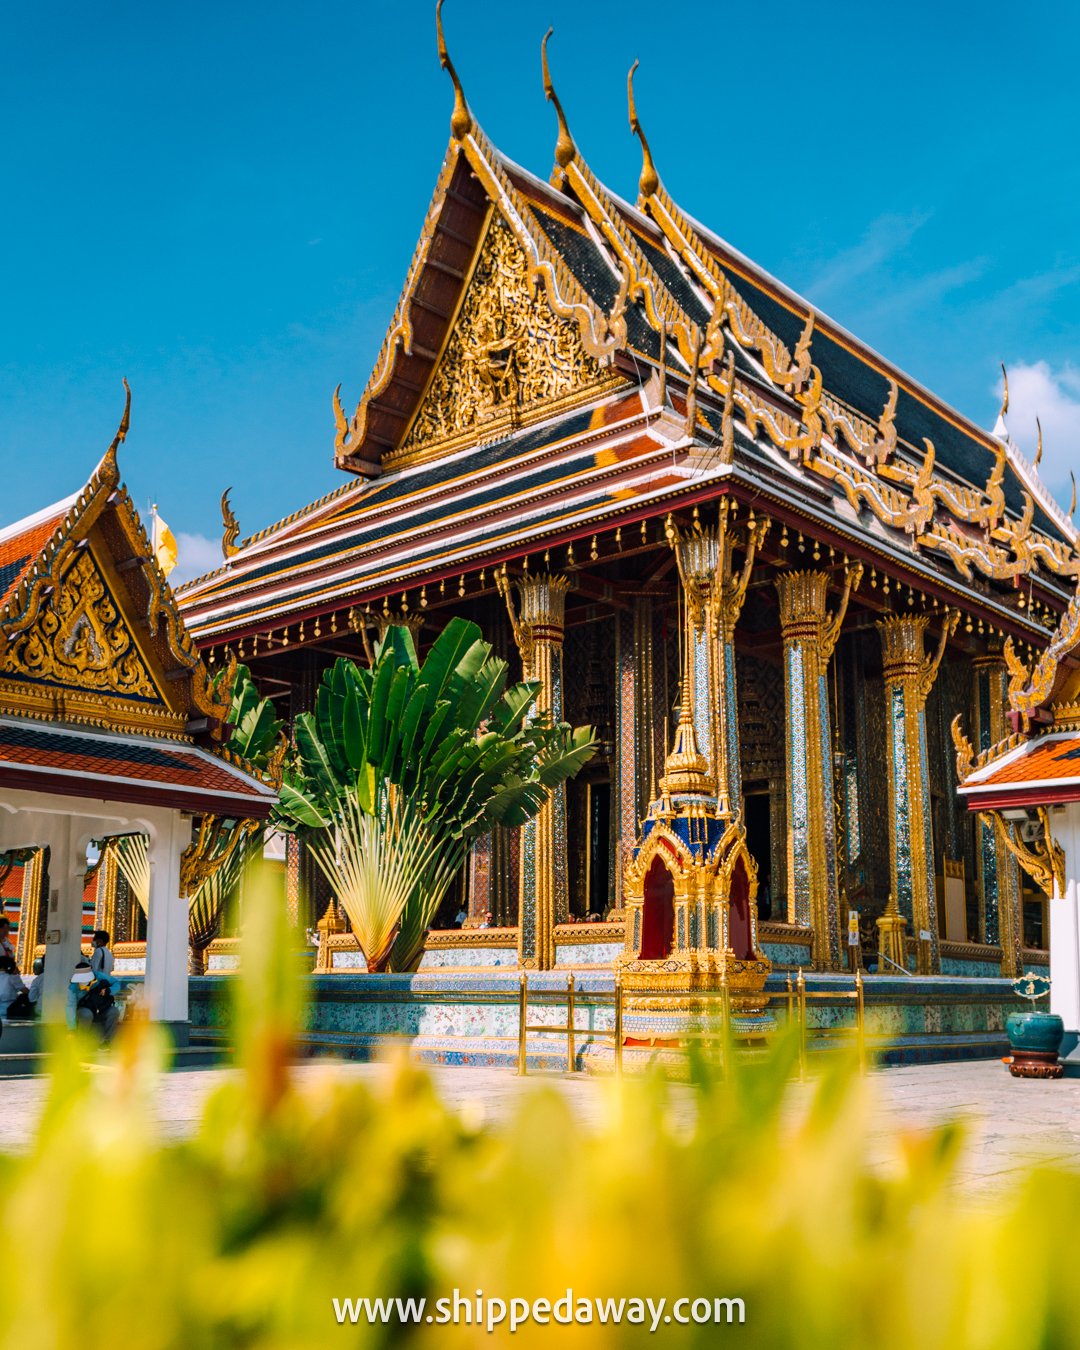 Grand Palace Bangkok Travel Guide, Things to do in the Grand Palace in Bangkok, best time to visit grand palace in bangkok